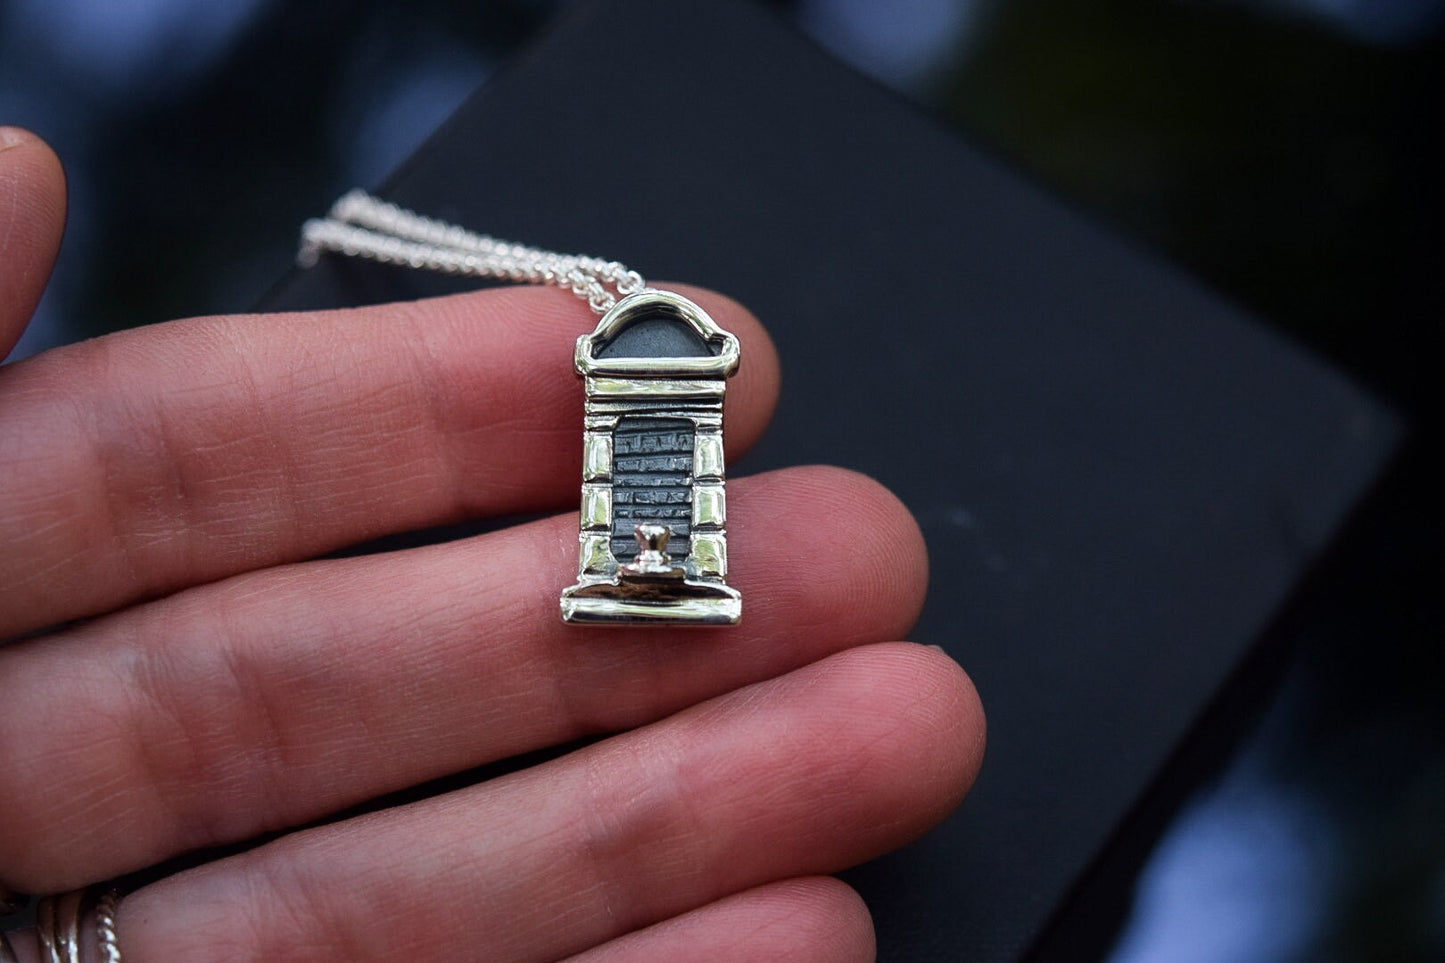 Small New Orleans Tomb Pendant/ Sterling Silver/ Cemetery